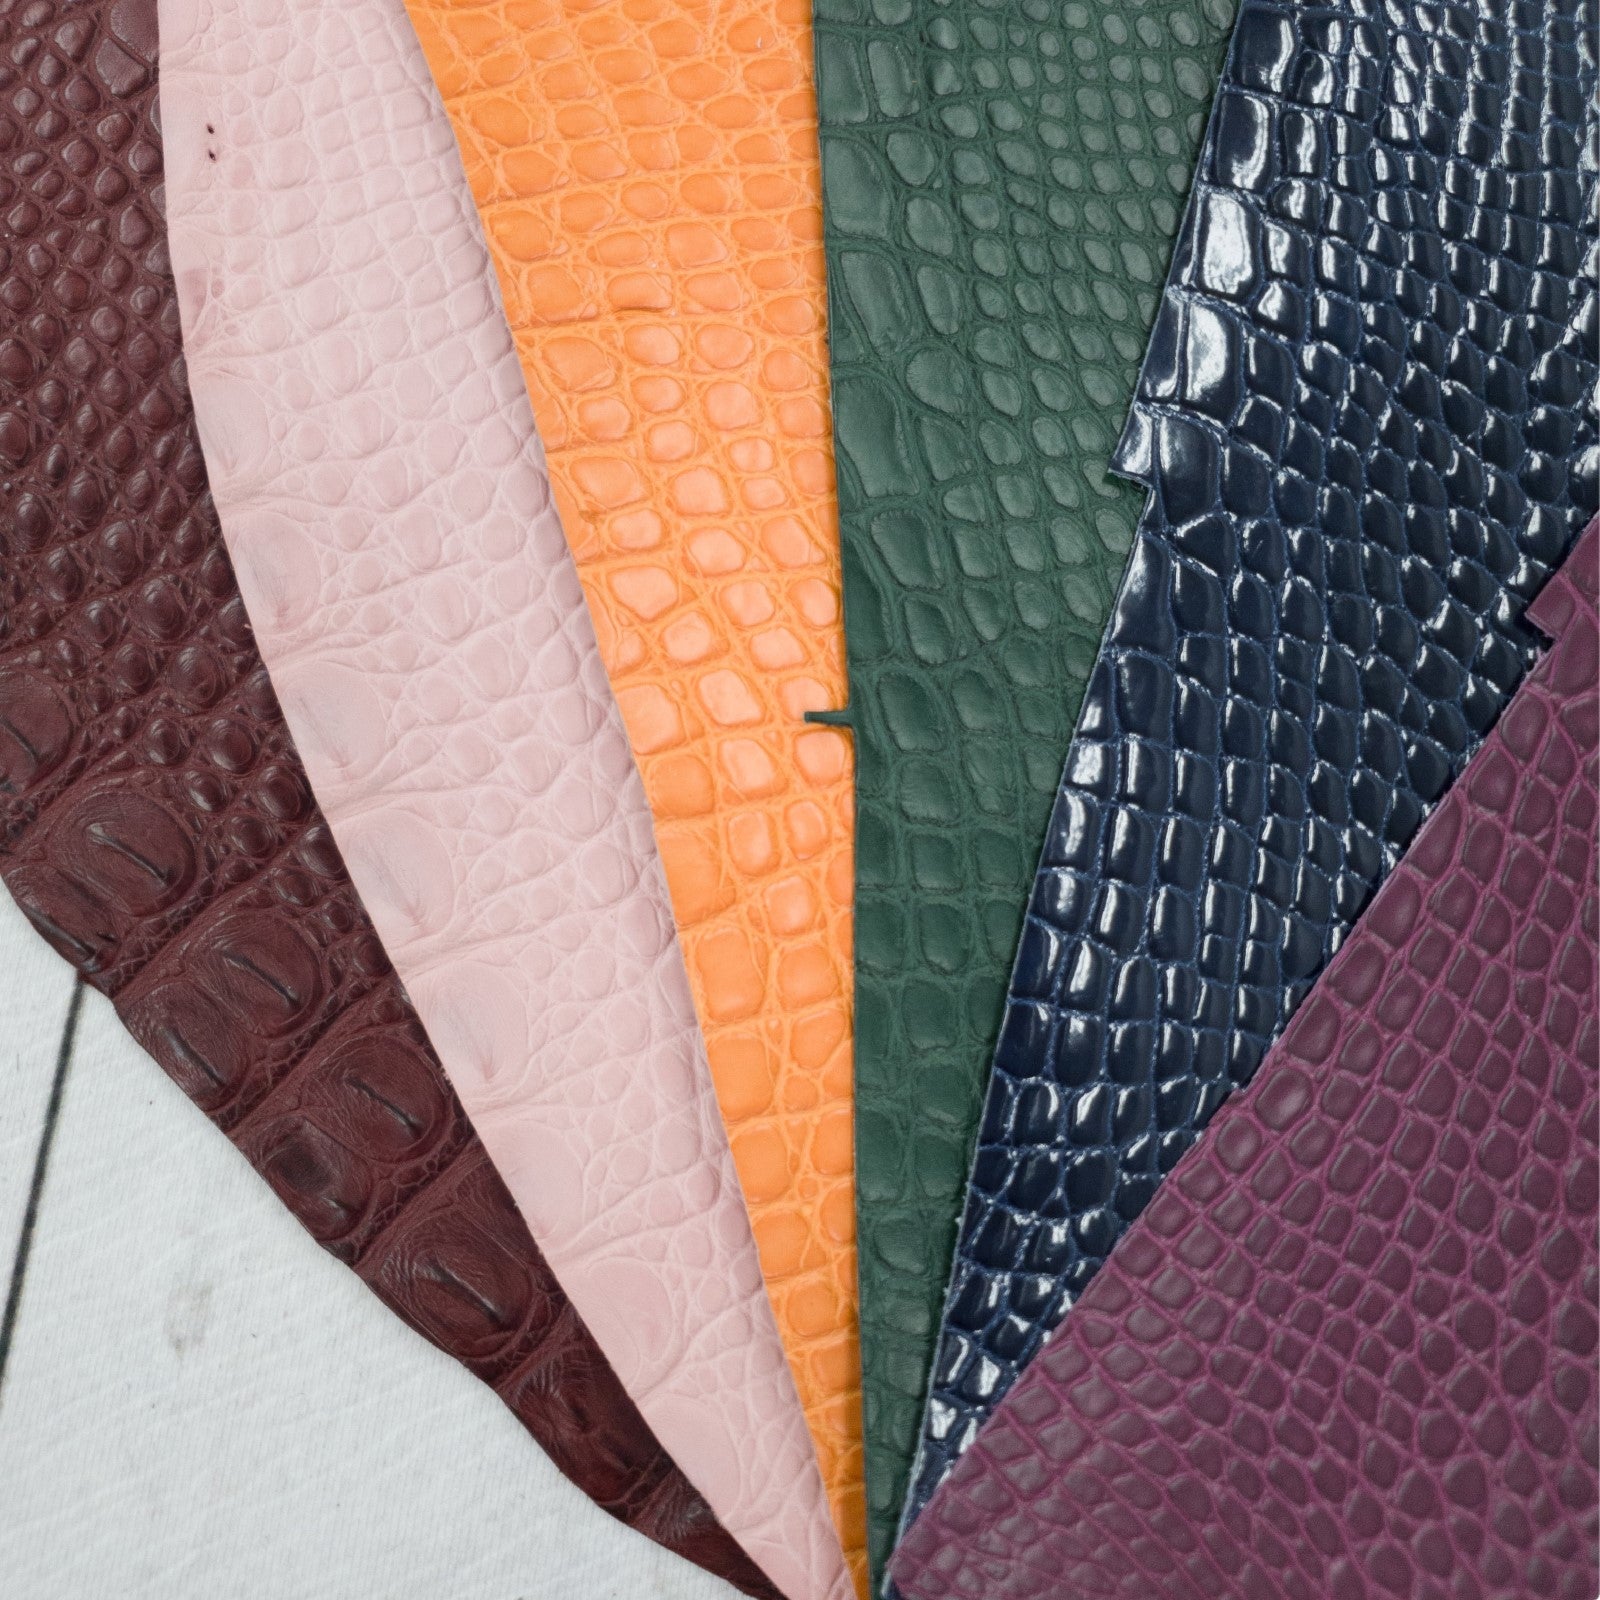 Crocodile Leather: How to Tell a Genuine Skin from a Fake